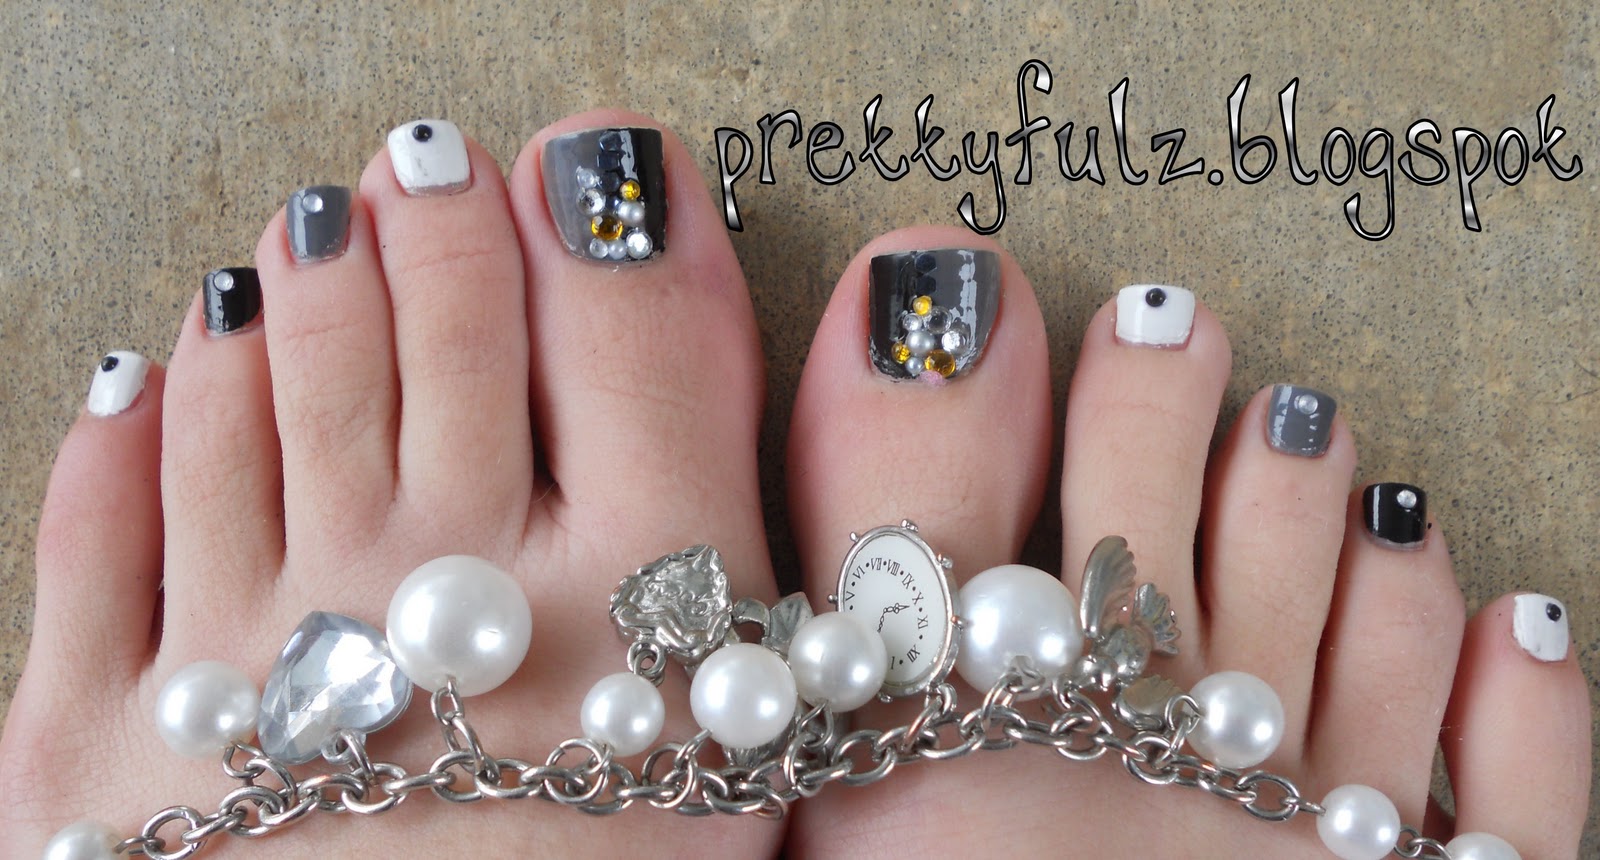 Black and White Pedicure Nail Art - wide 8